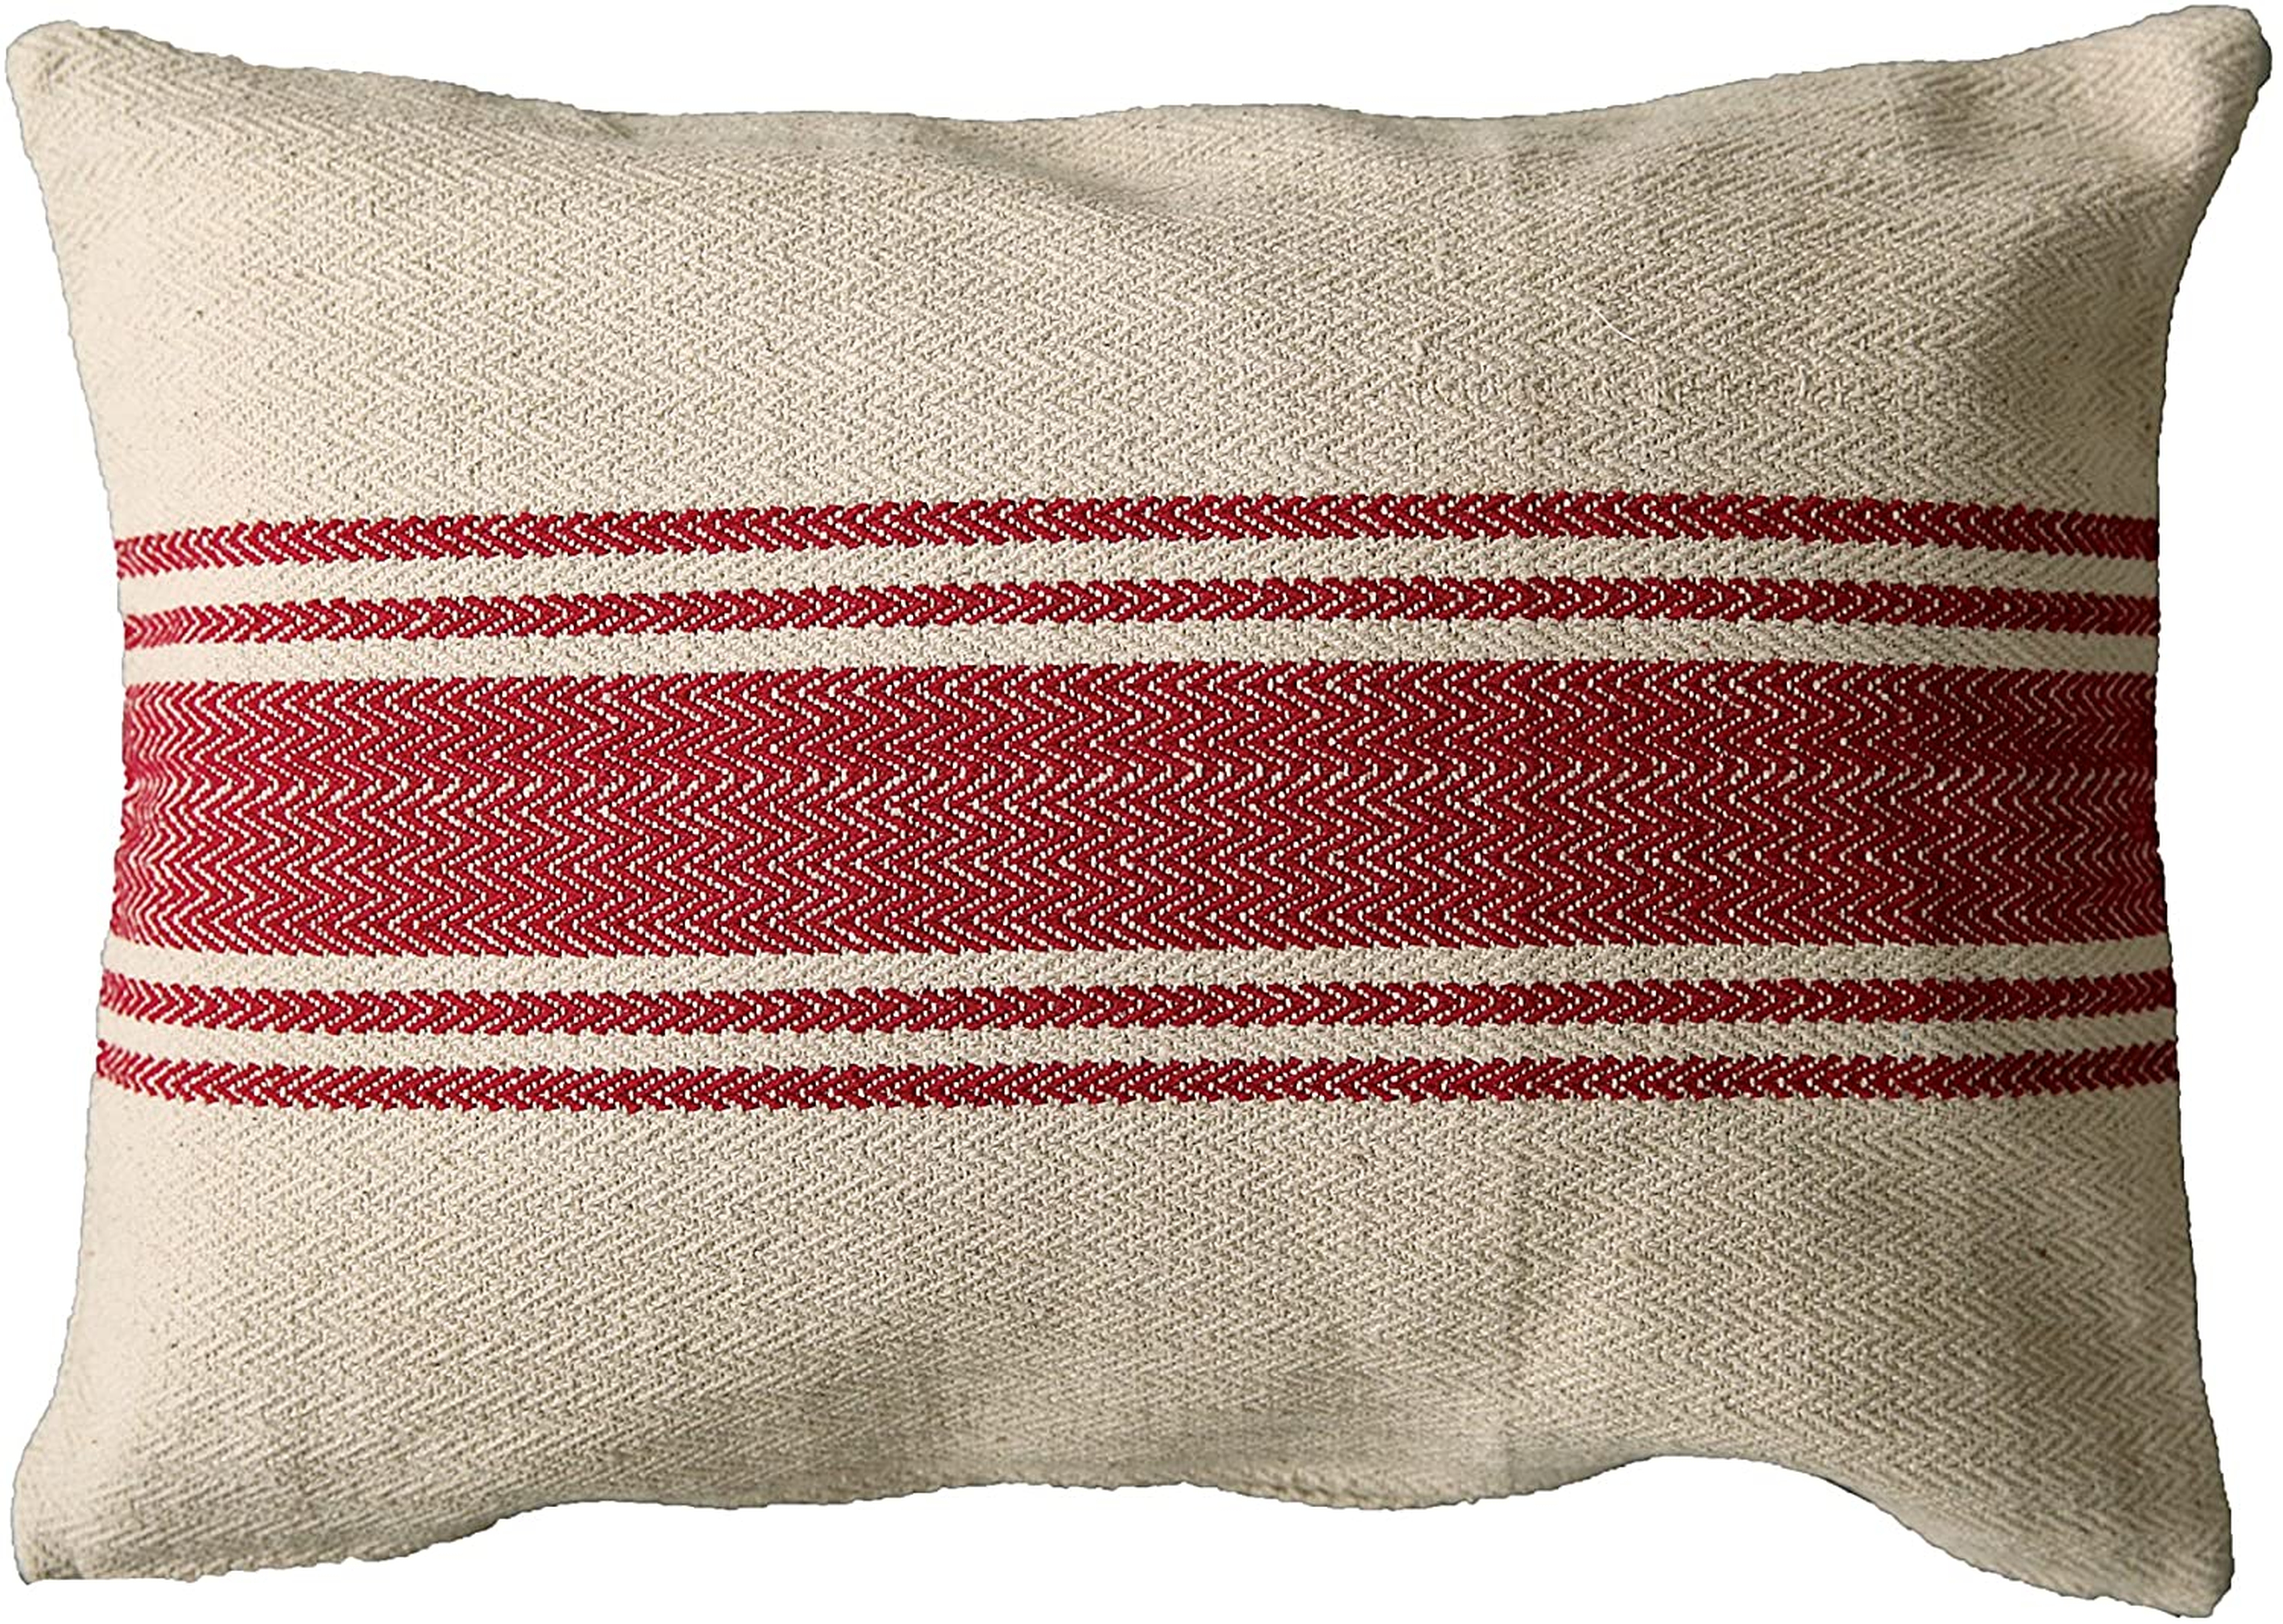 Cream Cotton Canvas Pillow with Red Stripes - Nomad Home